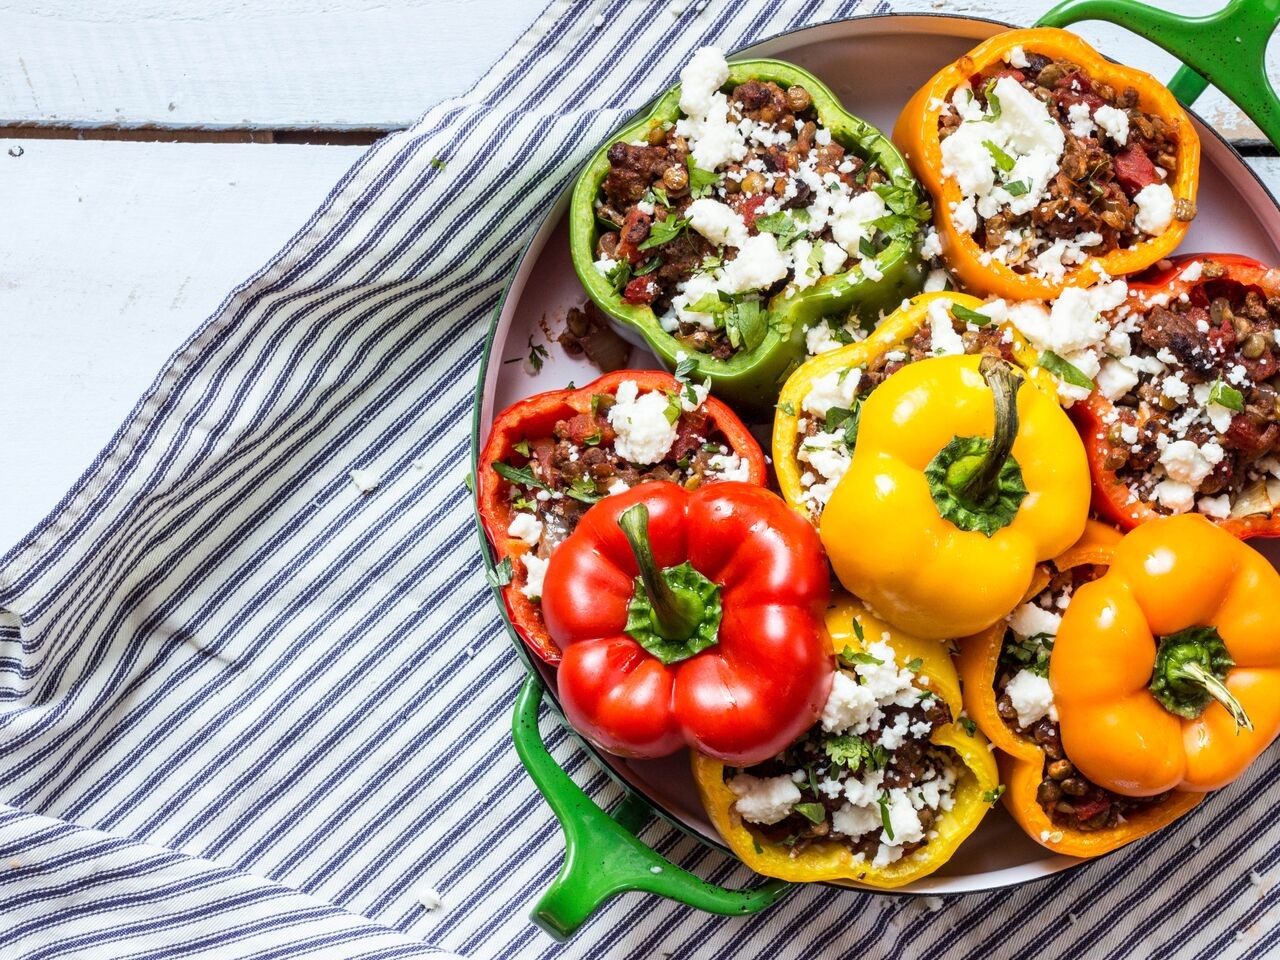 Stuffed Roasted Peppers with Lentils, Beef & Mushrooms